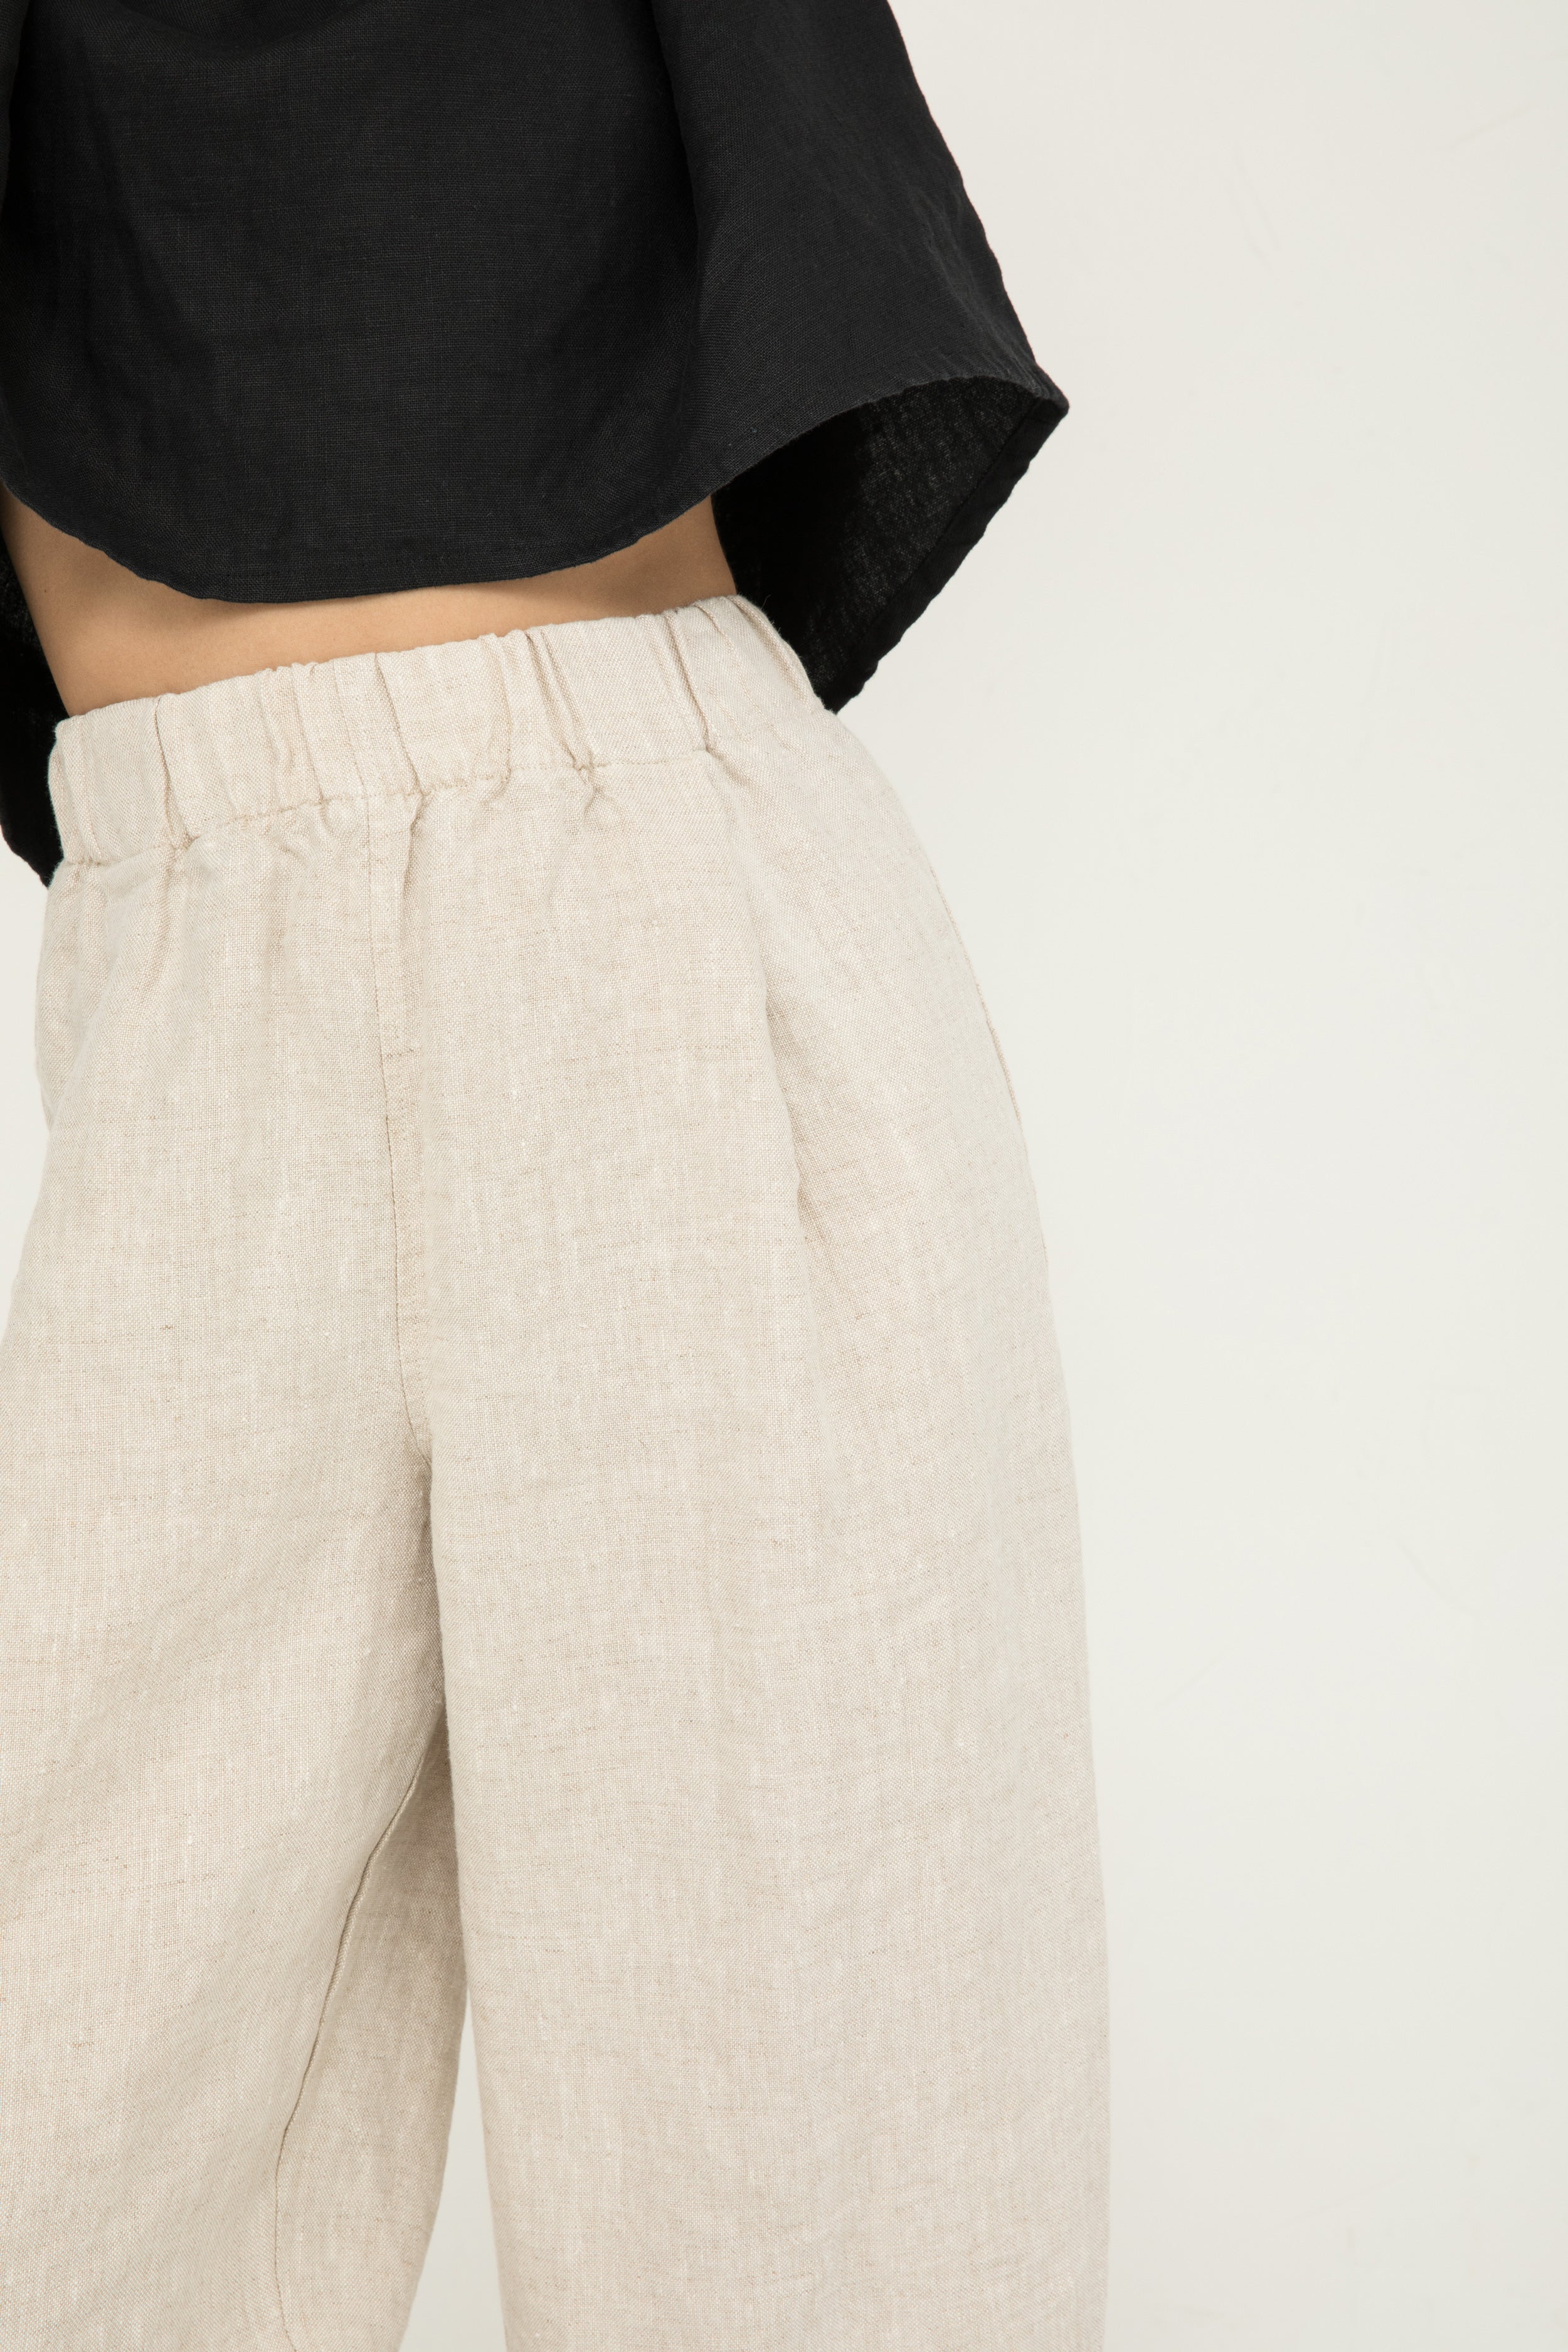 The Curator | Florence Pant, Andy Trouser & Clyde Work Pant